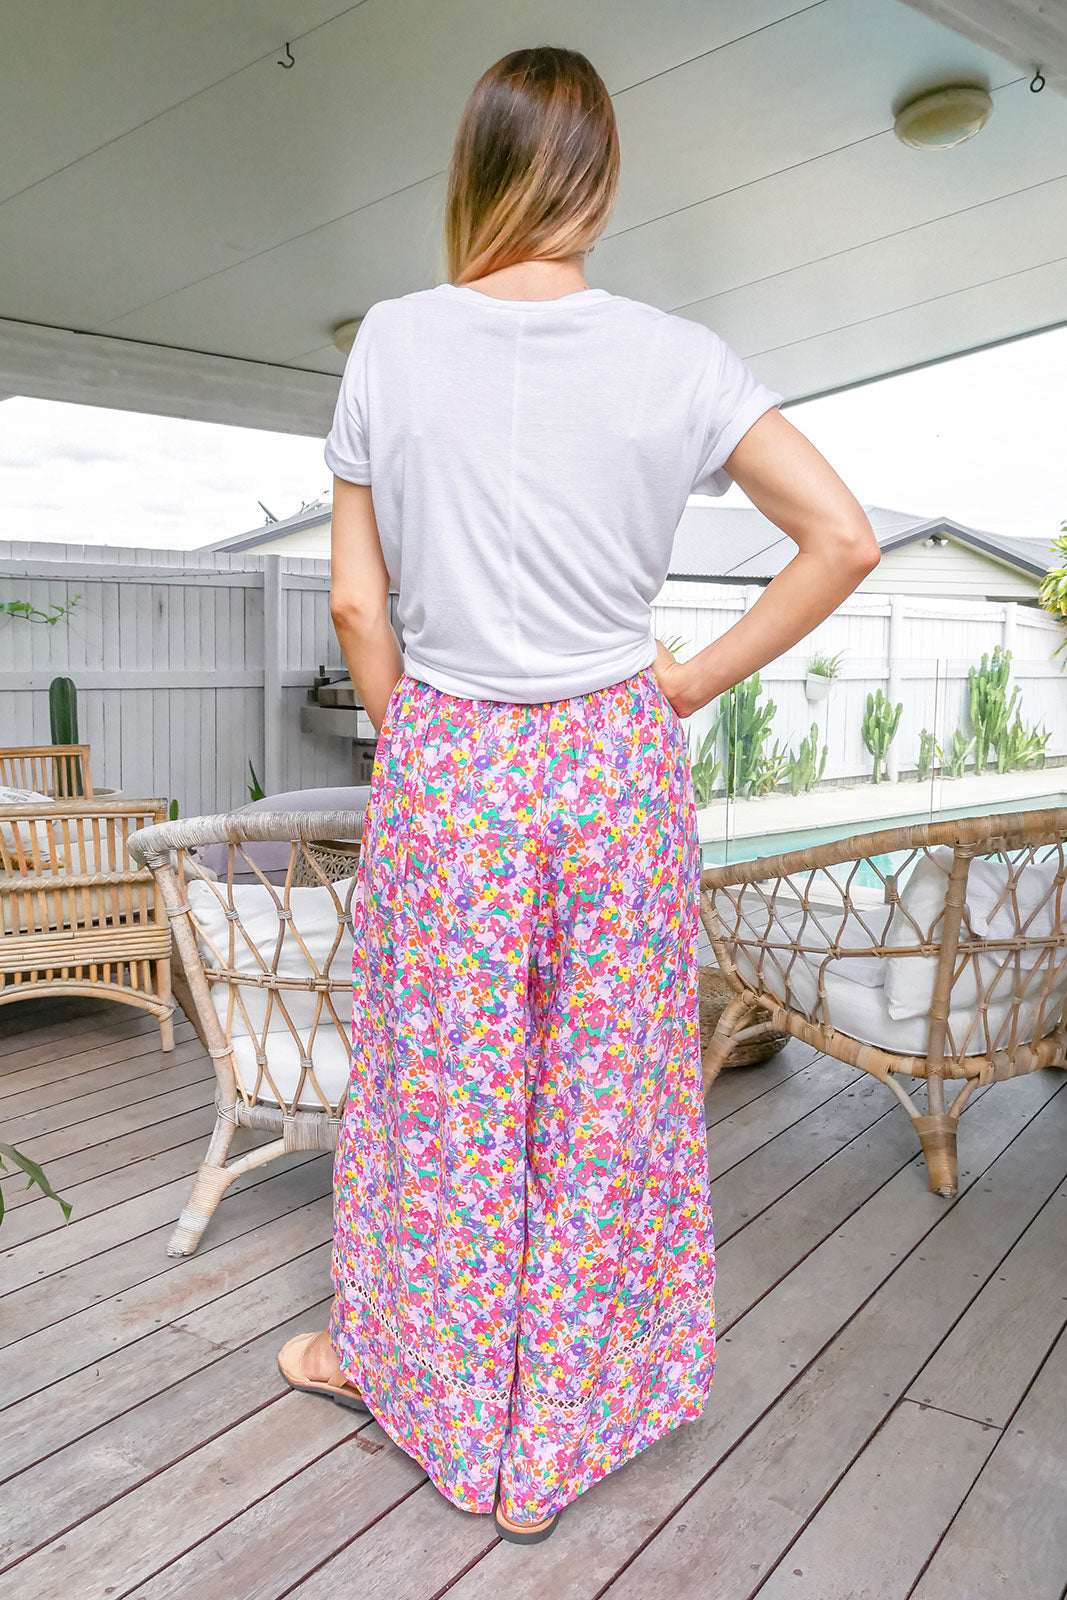 How To: Upcycle a Pair of Jeans into a Skirt - Upcycle Magazine Upcycle  Magazine